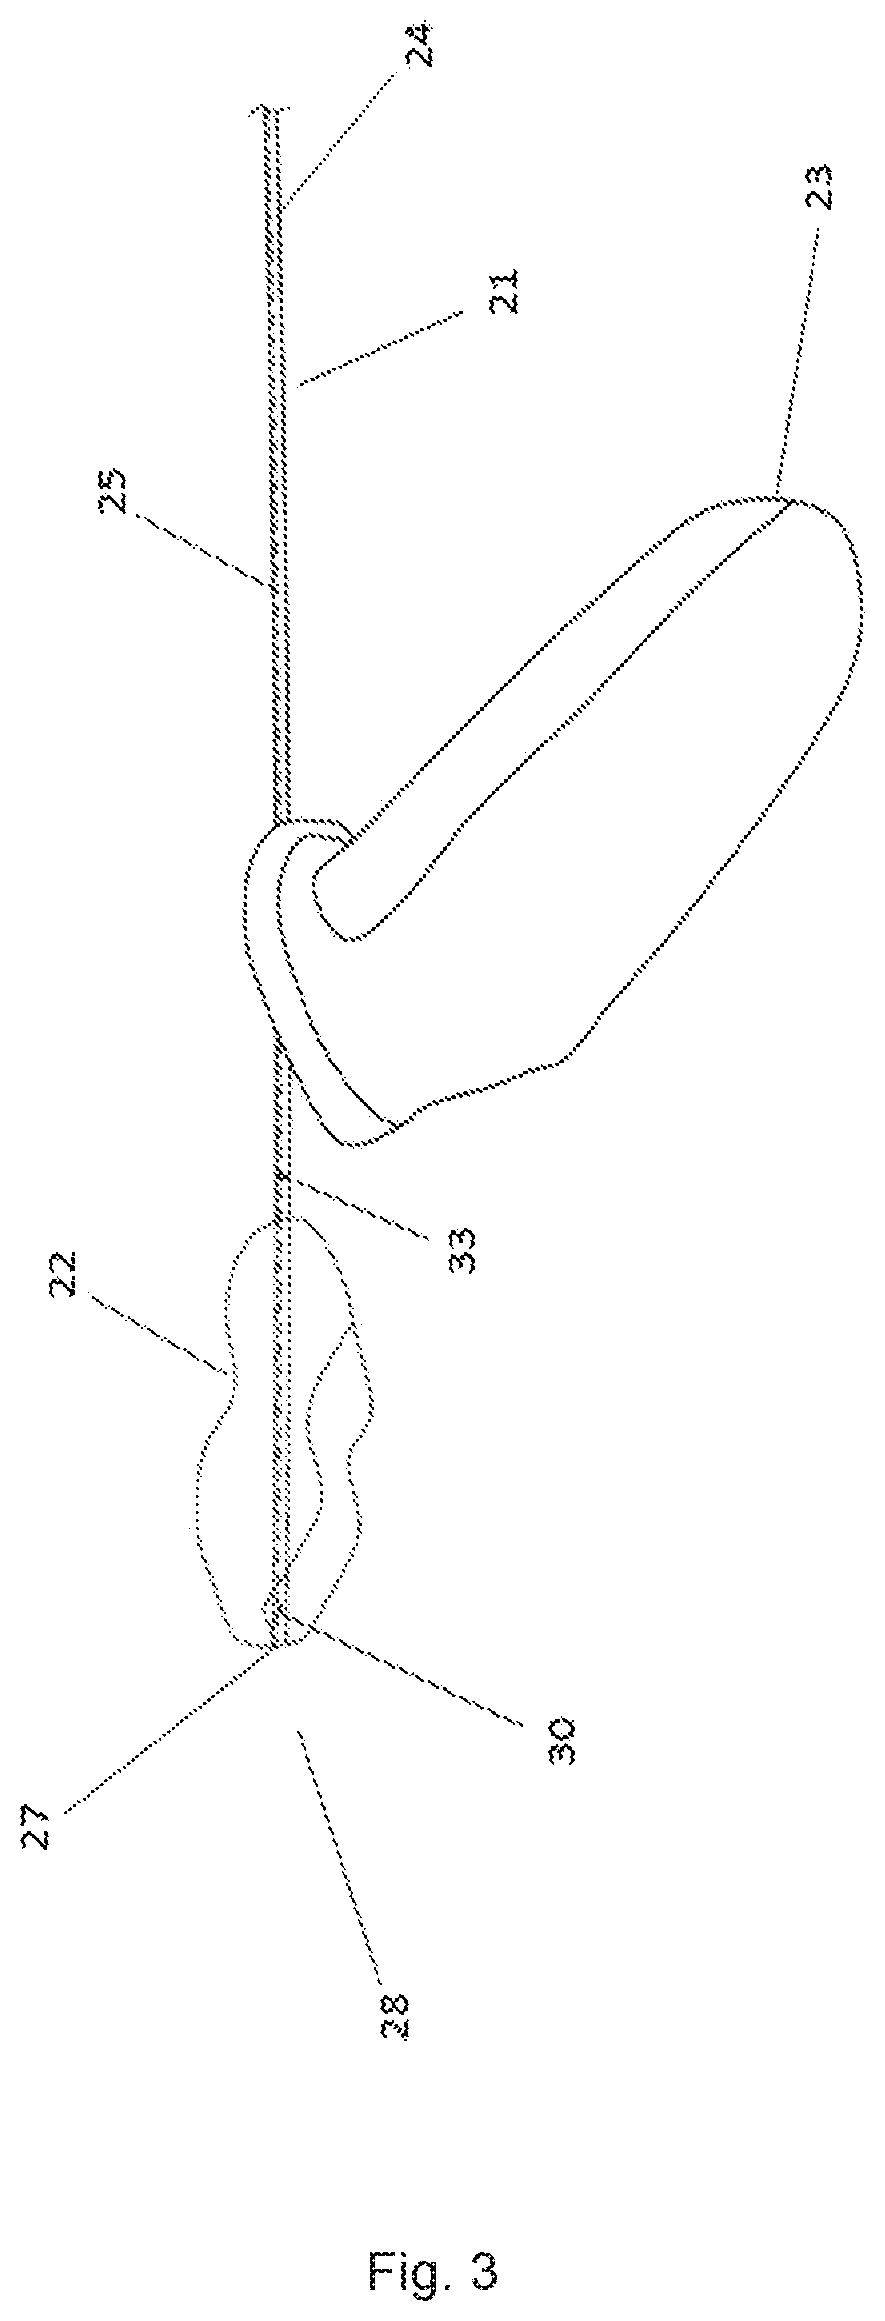 System and methods for facilitating child birth